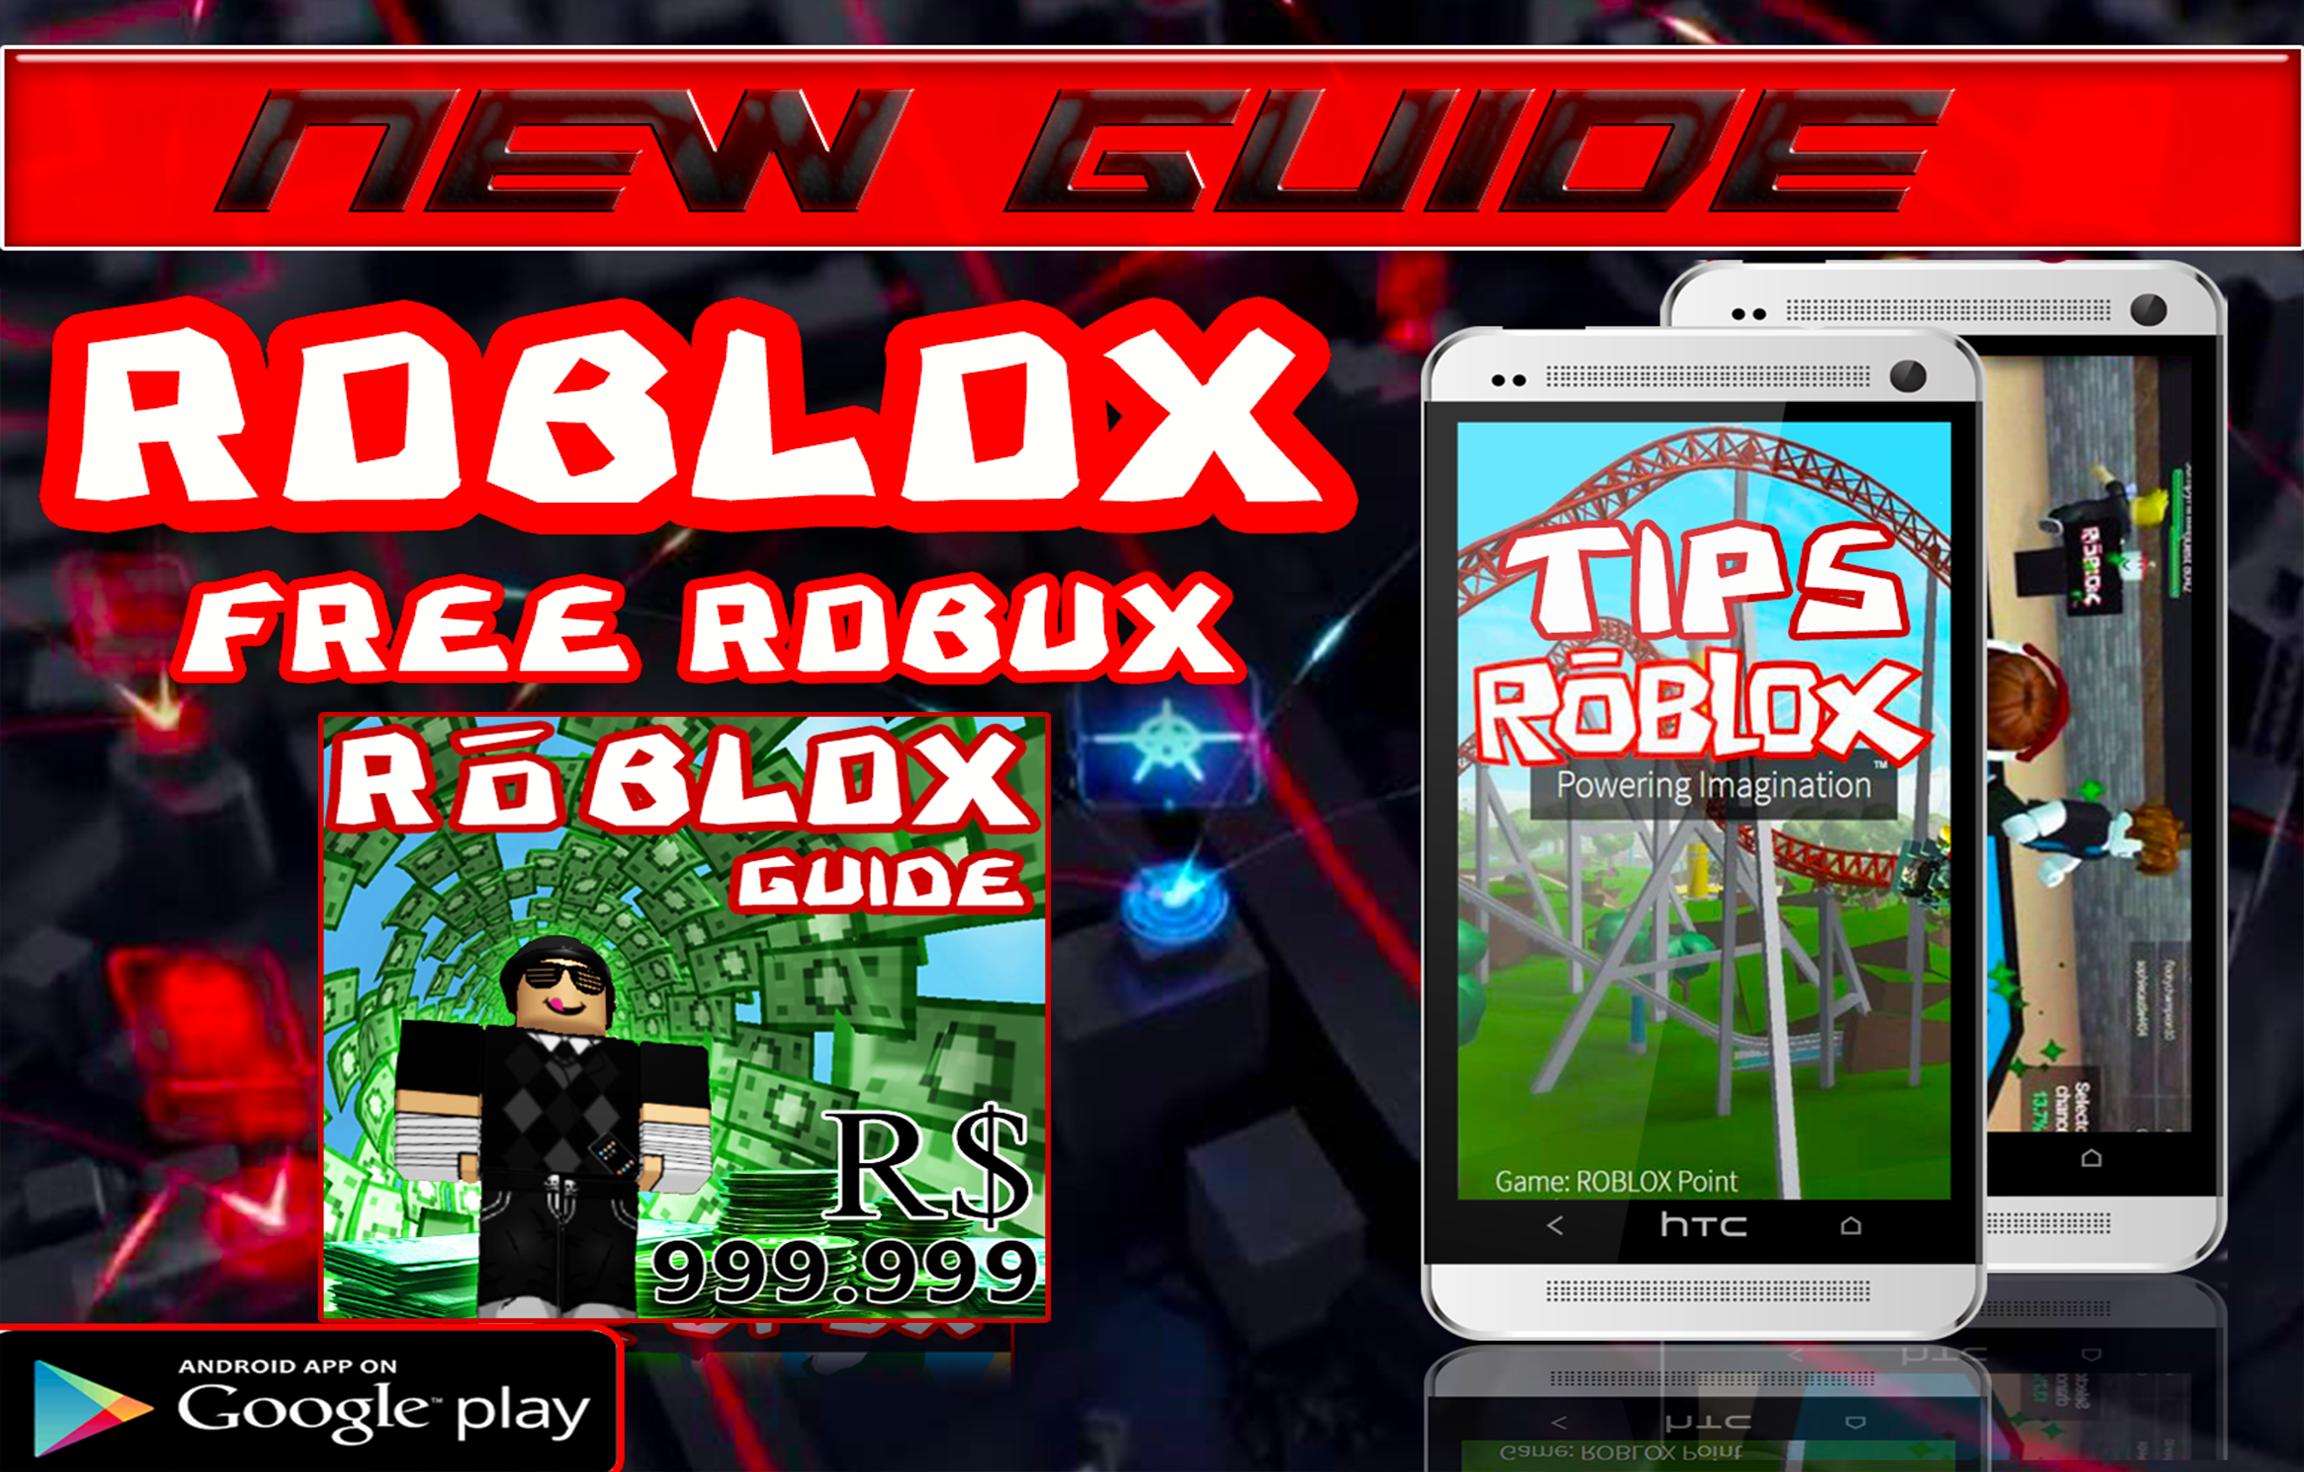 Guide For Roblox Free Robux For Android Apk Download - new roblox 2 robux game guide for android apk download